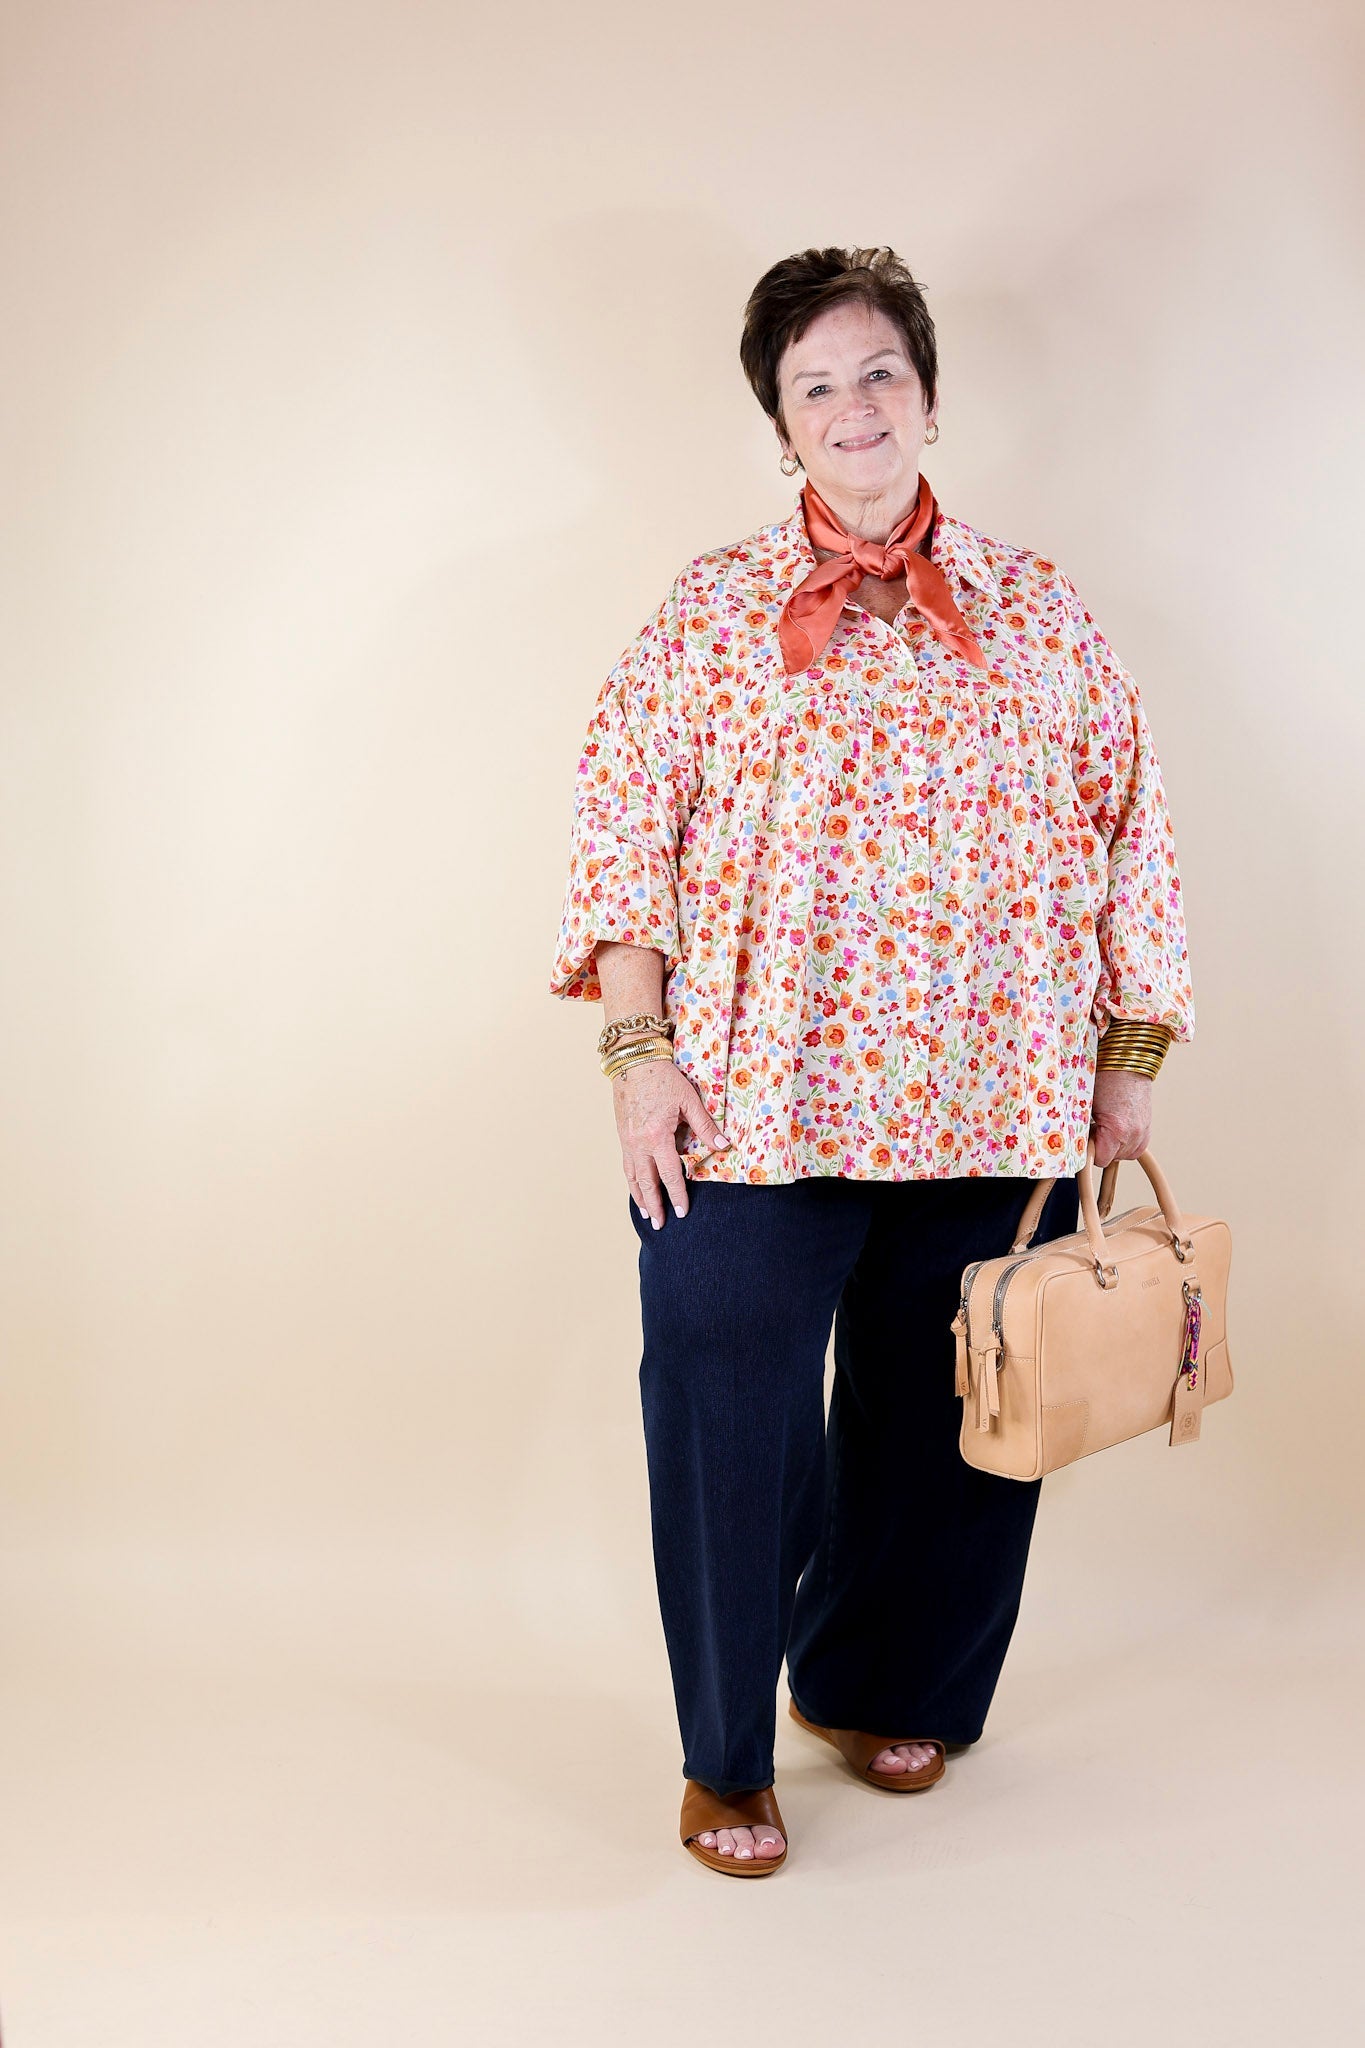 Secret Garden Floral Print Top with Collar and Long Sleeves in Cream - Giddy Up Glamour Boutique